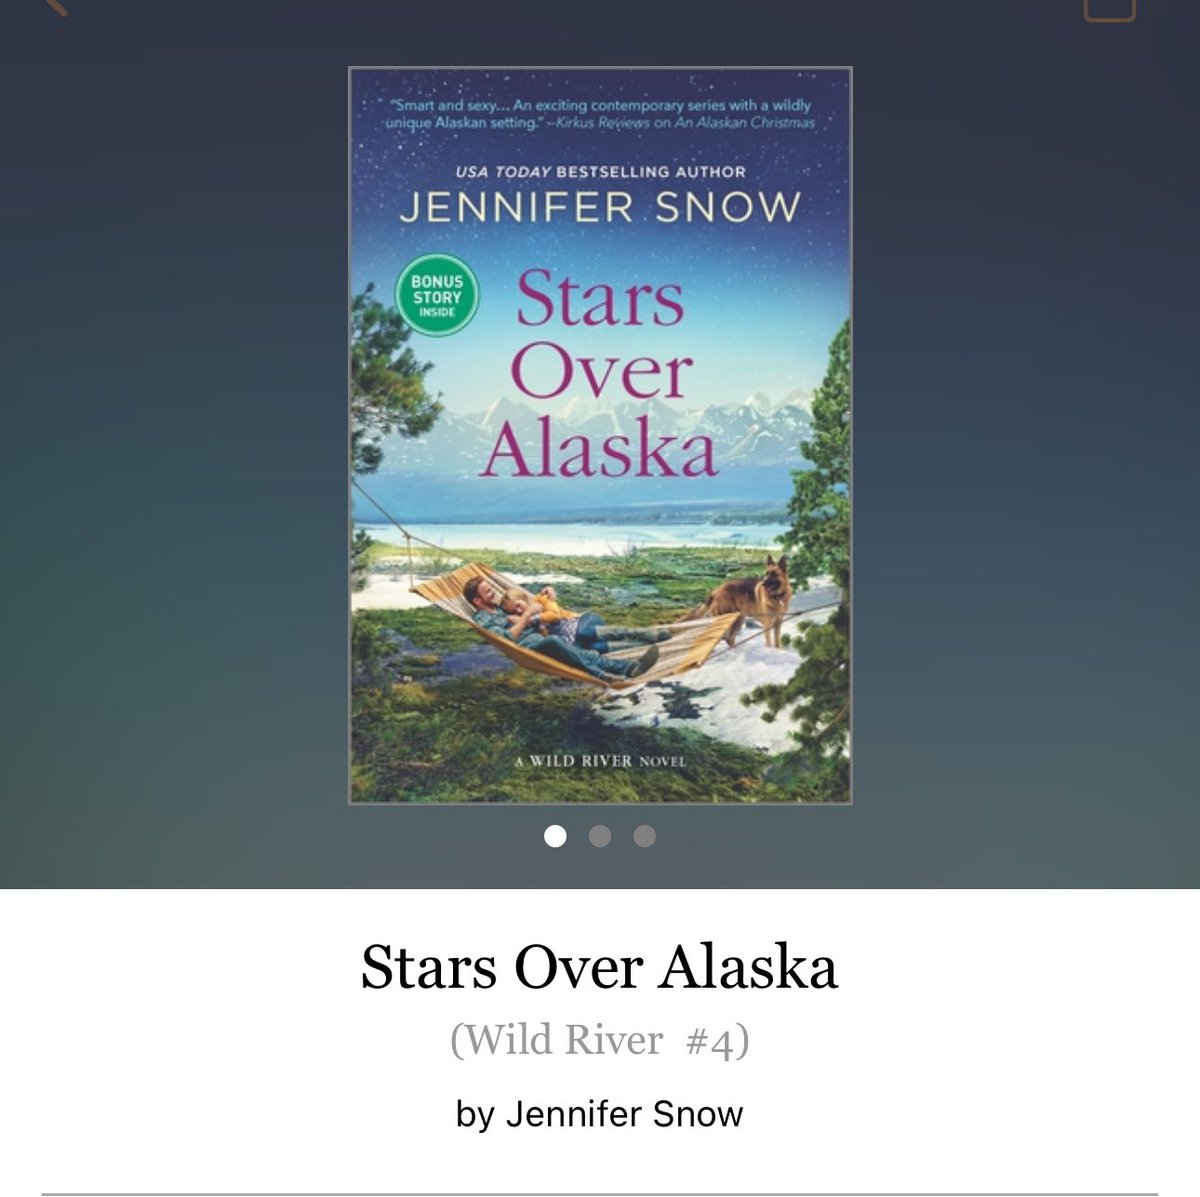 Stars over Alaska by Jennifer Snow 

#starsoveralaska by #JenniferSnow #6272 #24chapters #379pages #421o400 #Series #Book #58for15 #WildRiverSeris #Book4of6 #LeviAndLeslie #april2024 #clearingoffreadingshelves #whatsnext #readitquick